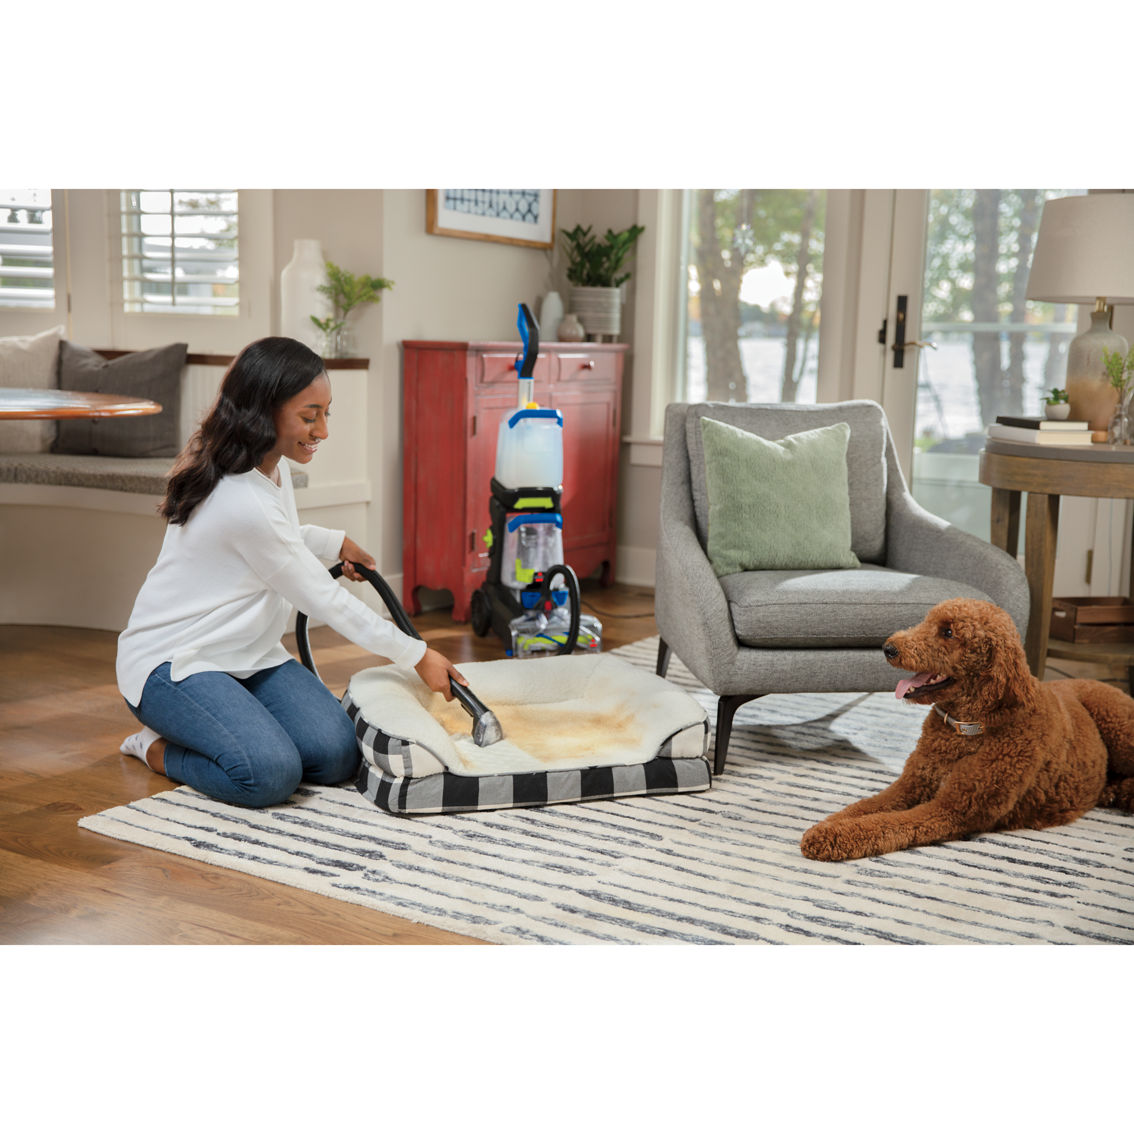 Bissell TurboClean DualPro Pet Carpet Cleaner - Image 6 of 10